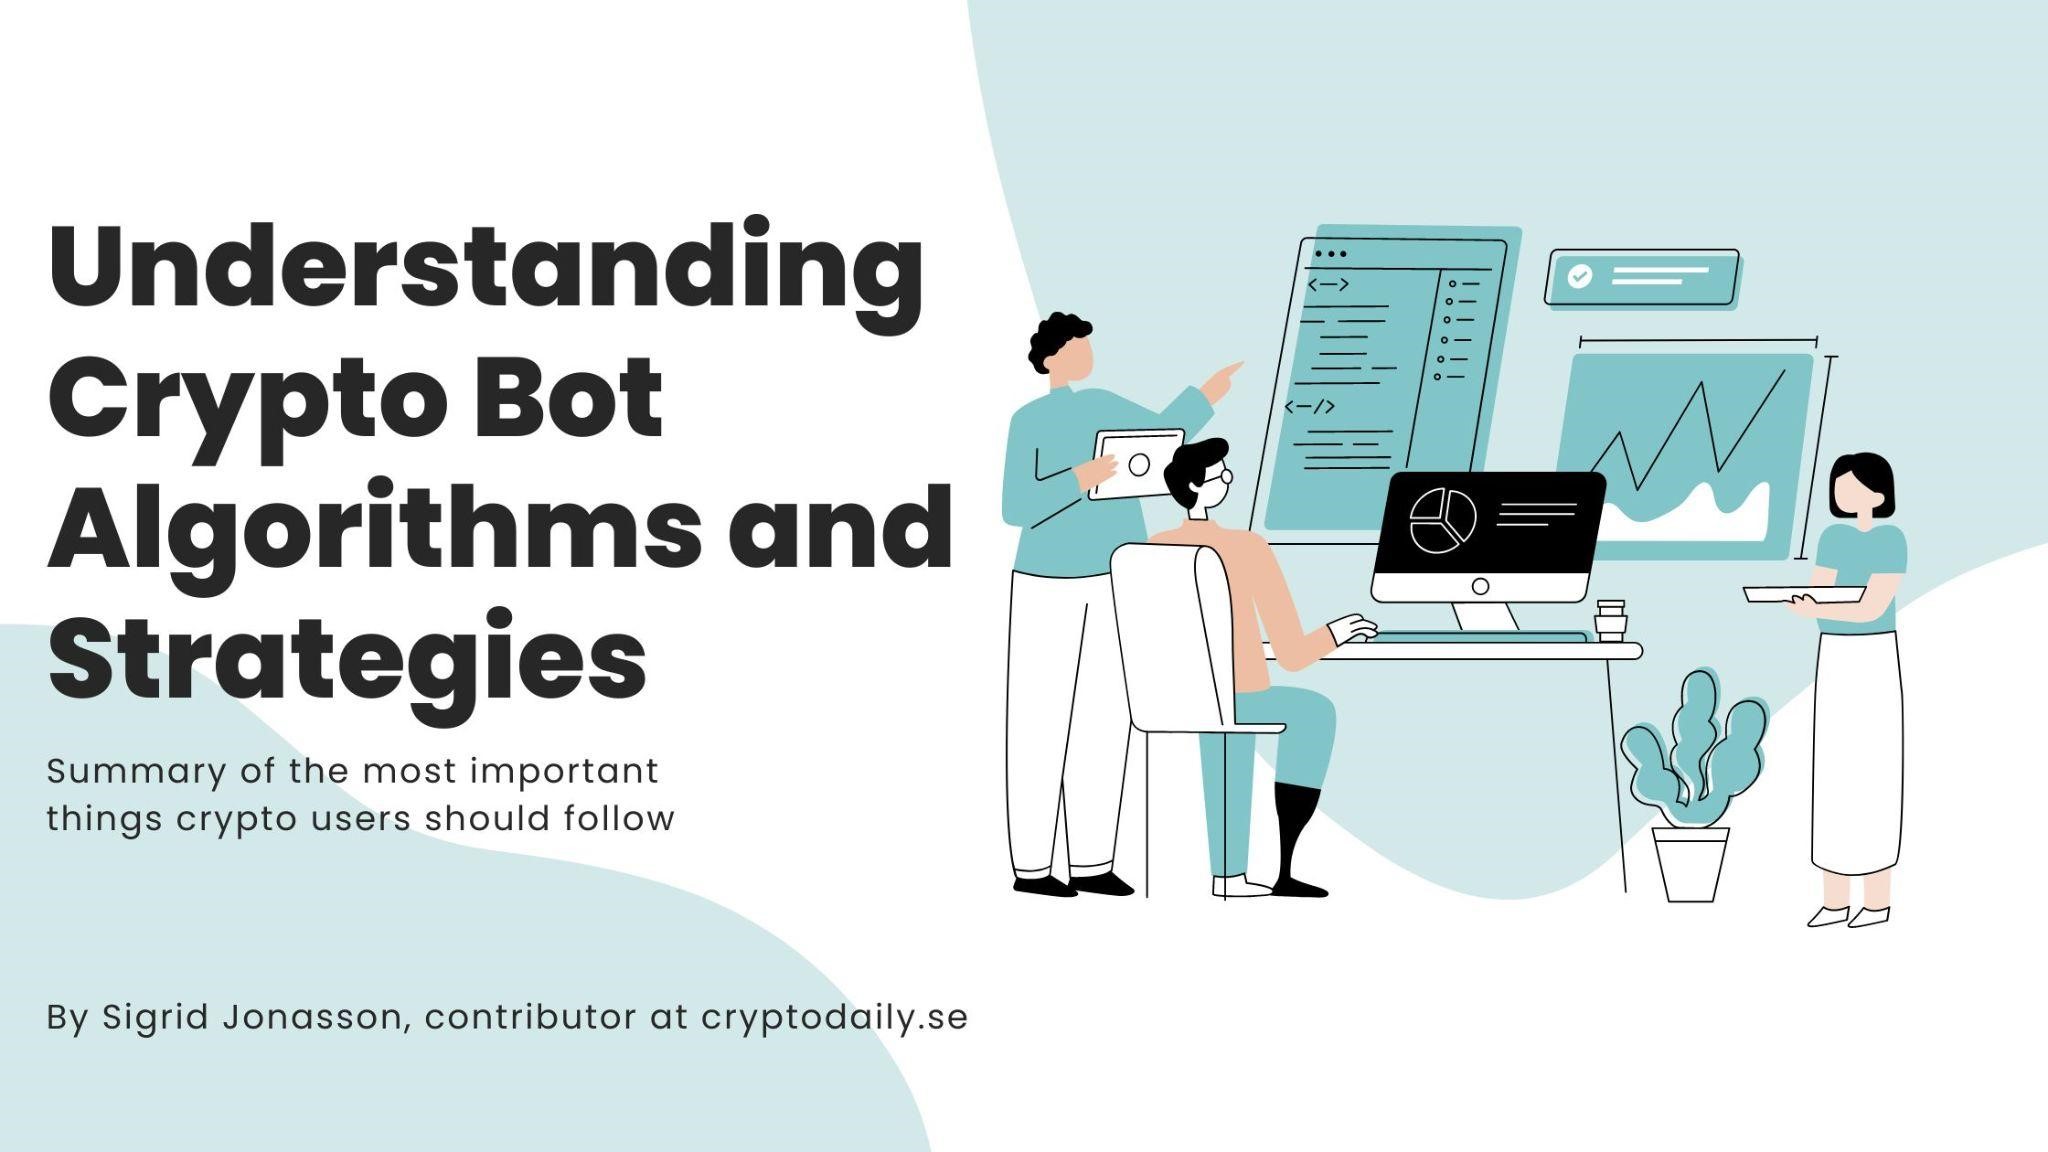 A Comprehensive Guide to Understanding Crypto Bot Algorithms and Strategies